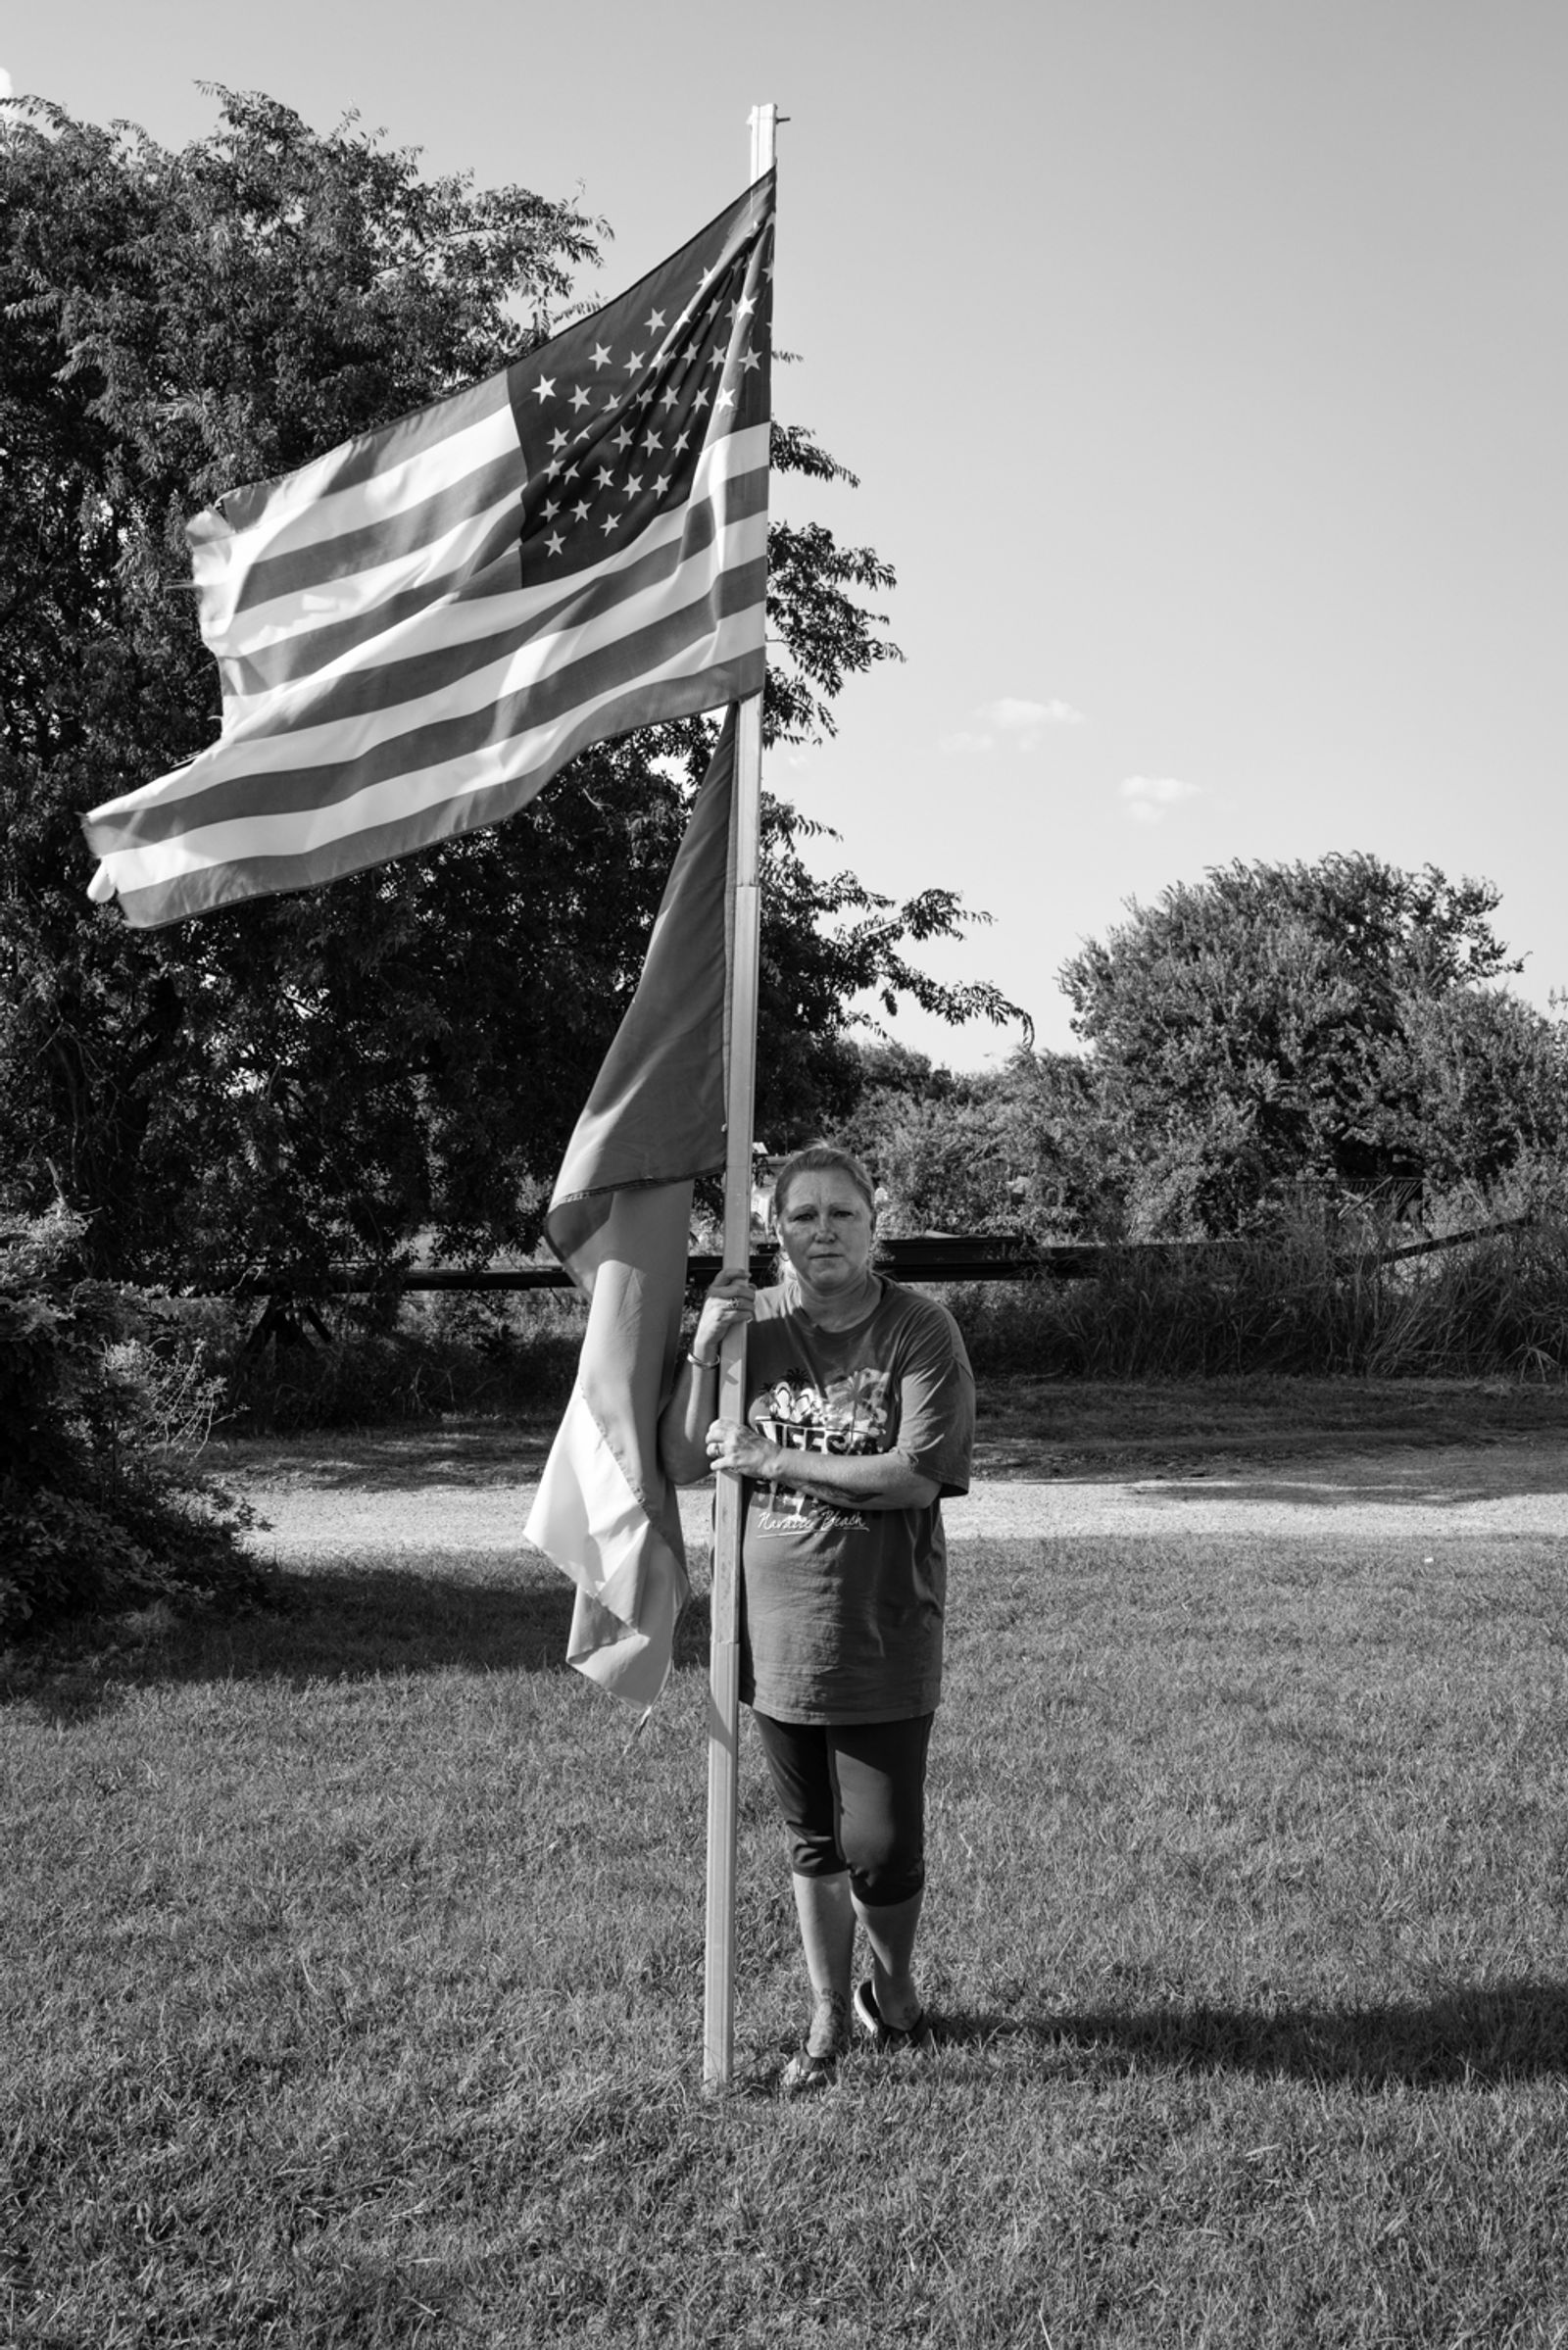 © Richard Sharum - A woman stands next to the flag pole in her front yard. Wichita Falls, Texas. 07.28.2021